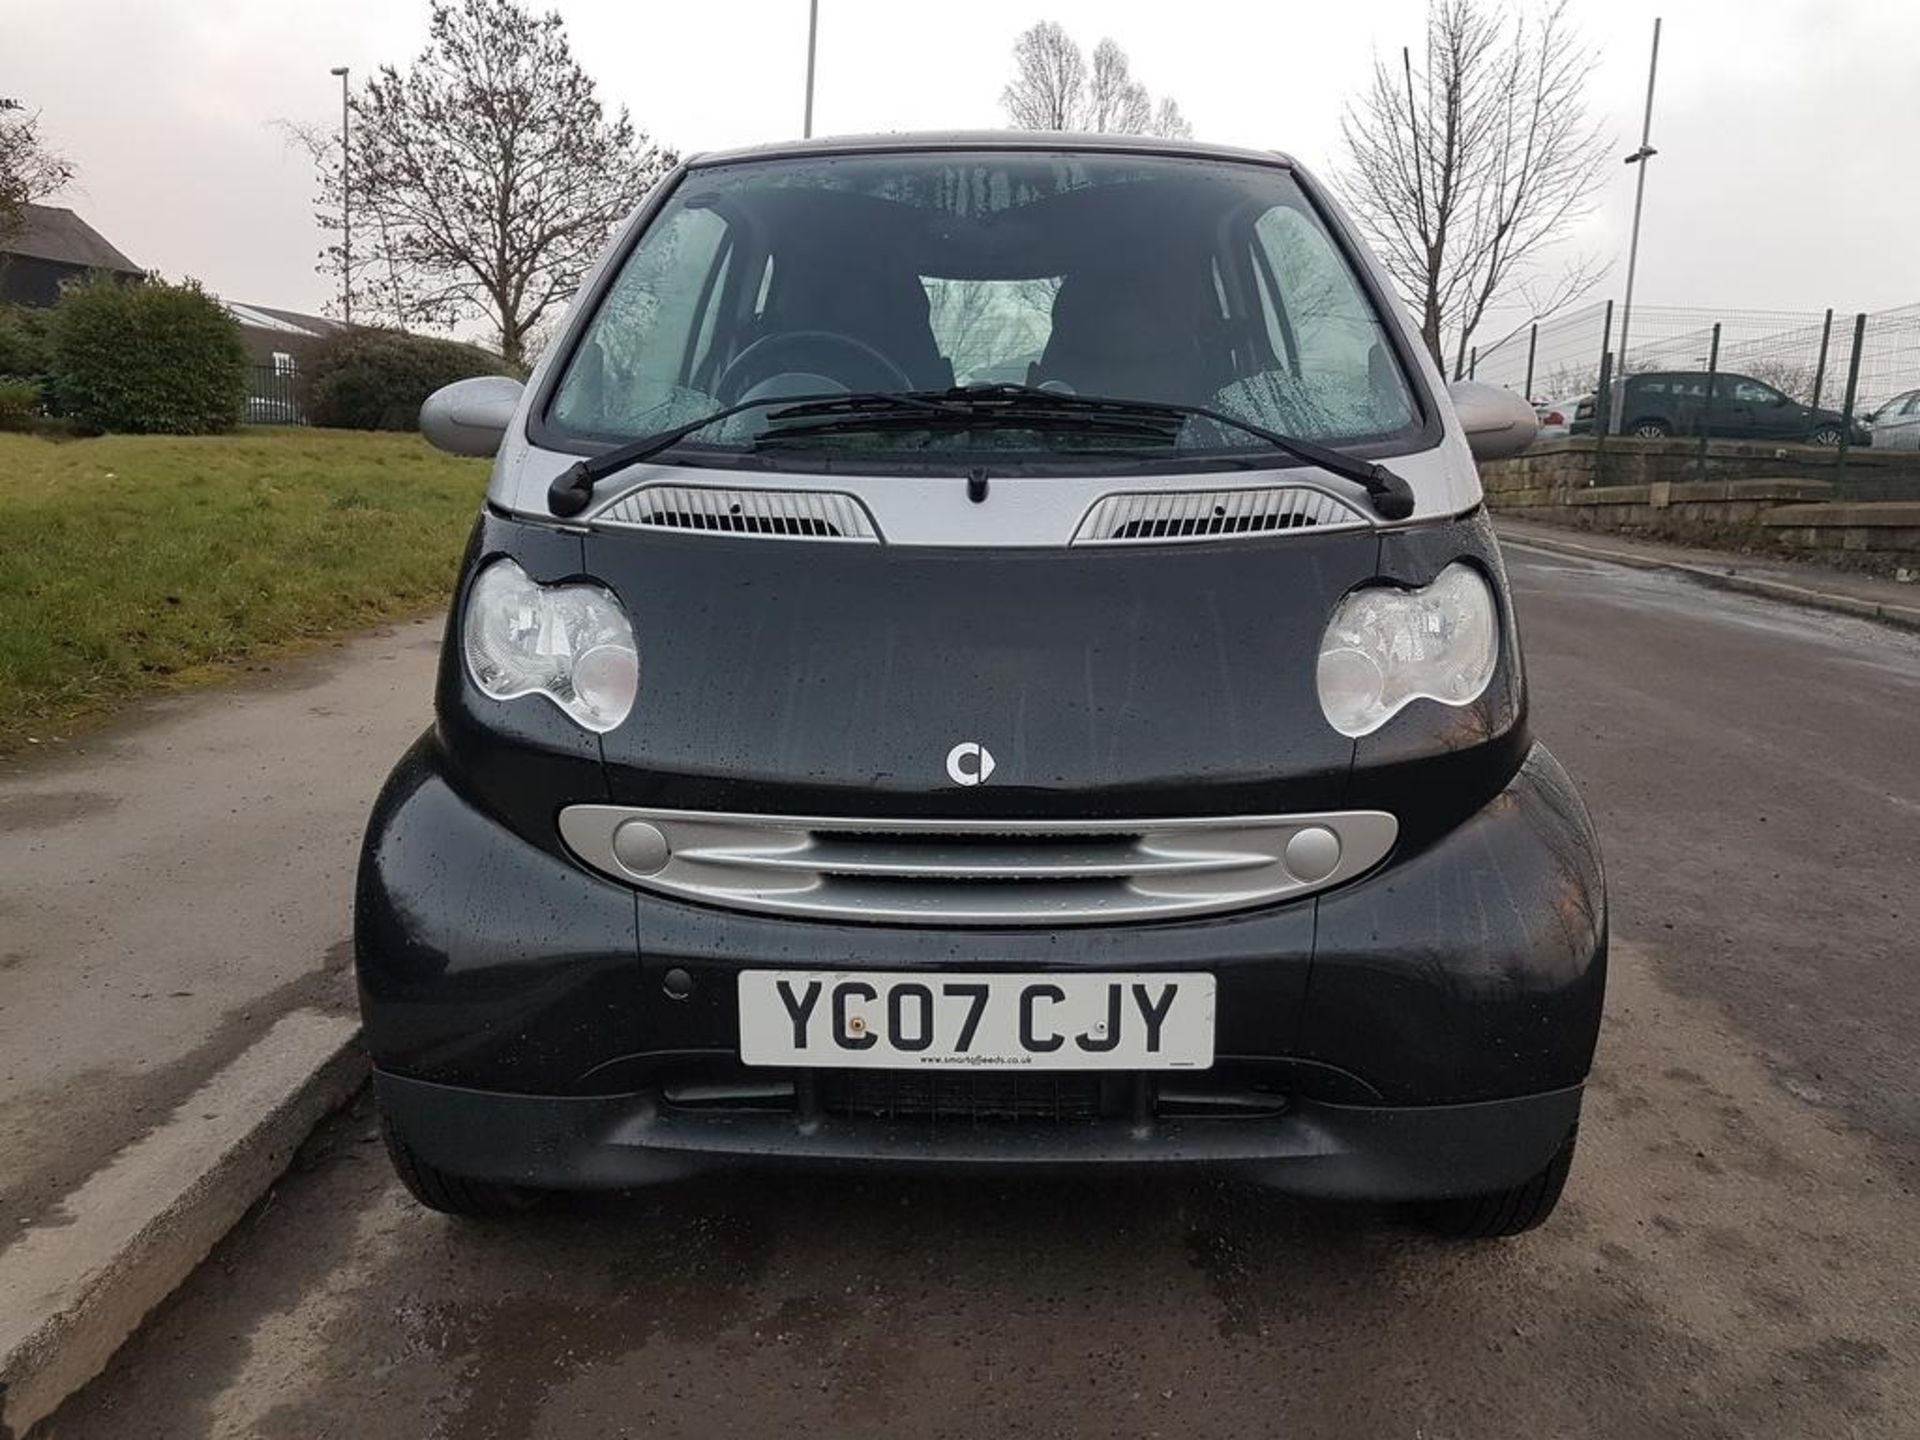 SMART, FOR TWO CITY PASSION, YC07 CJY, 0.7 LTR, PETROL, AUTOMATIC, 2007, 2 DOOR HATCH, CURRENT